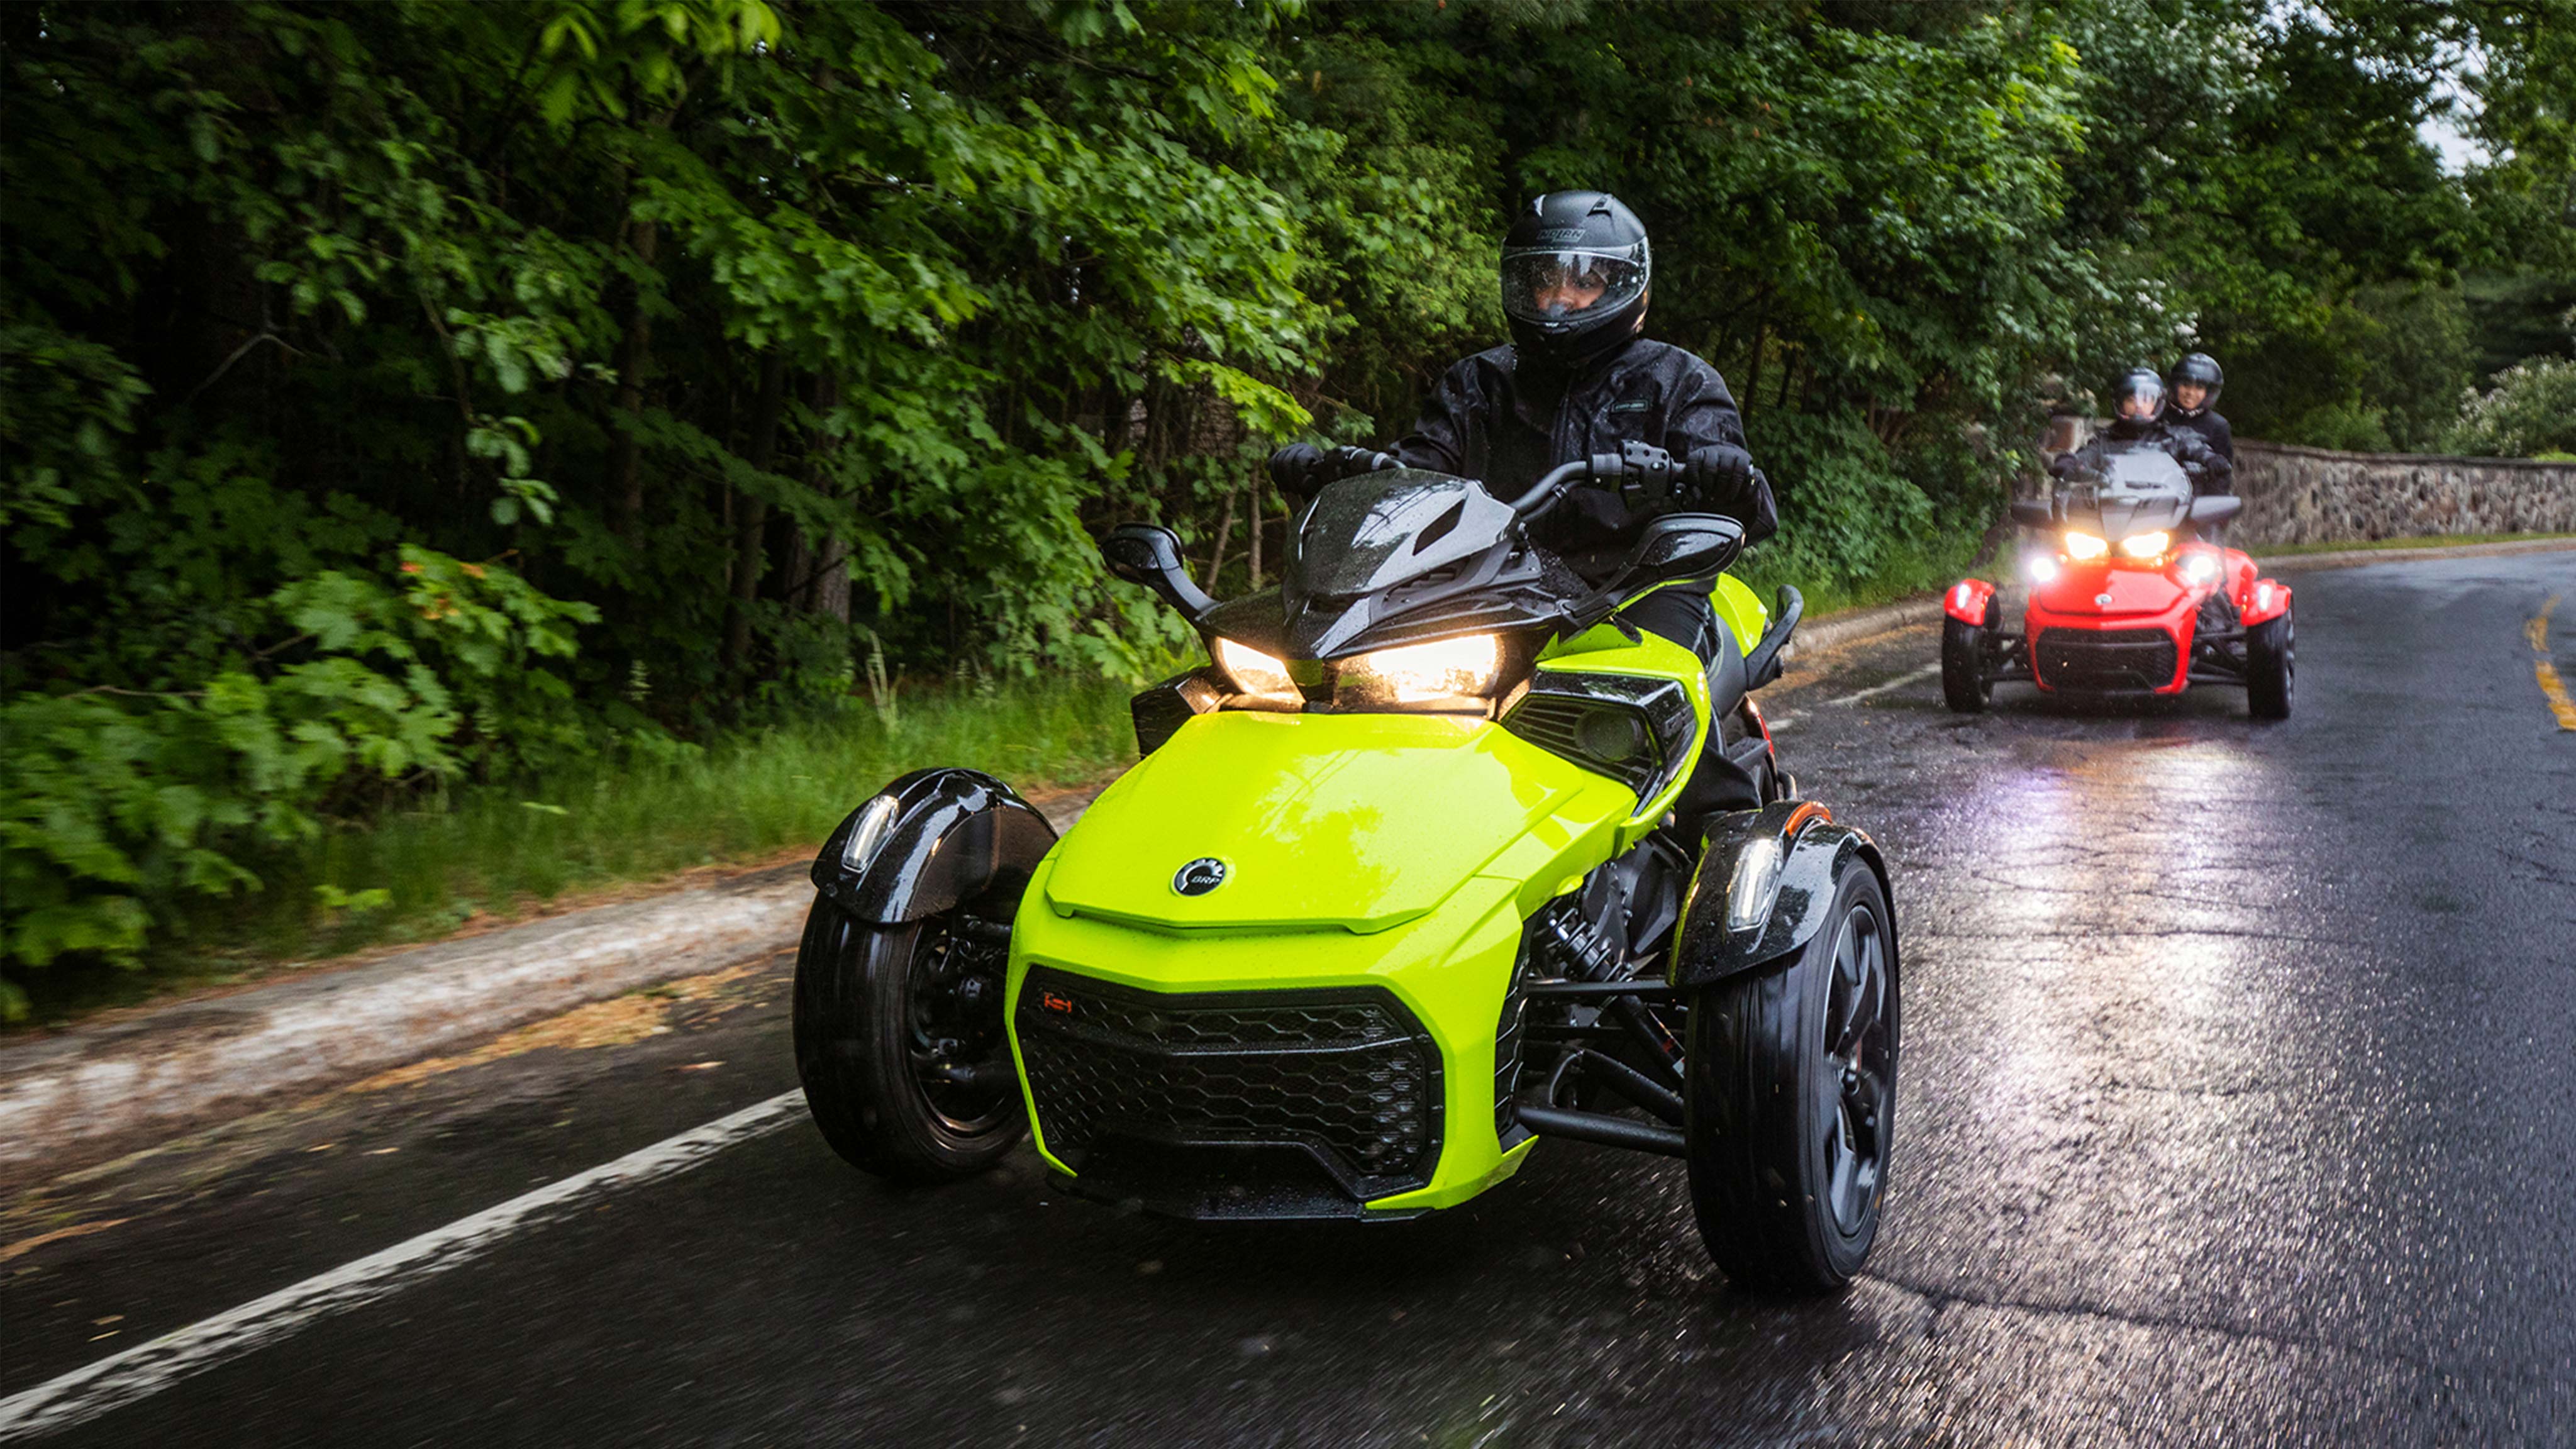 Yellow Can-Am F3 riding in the rain followed by a red Can-Am.